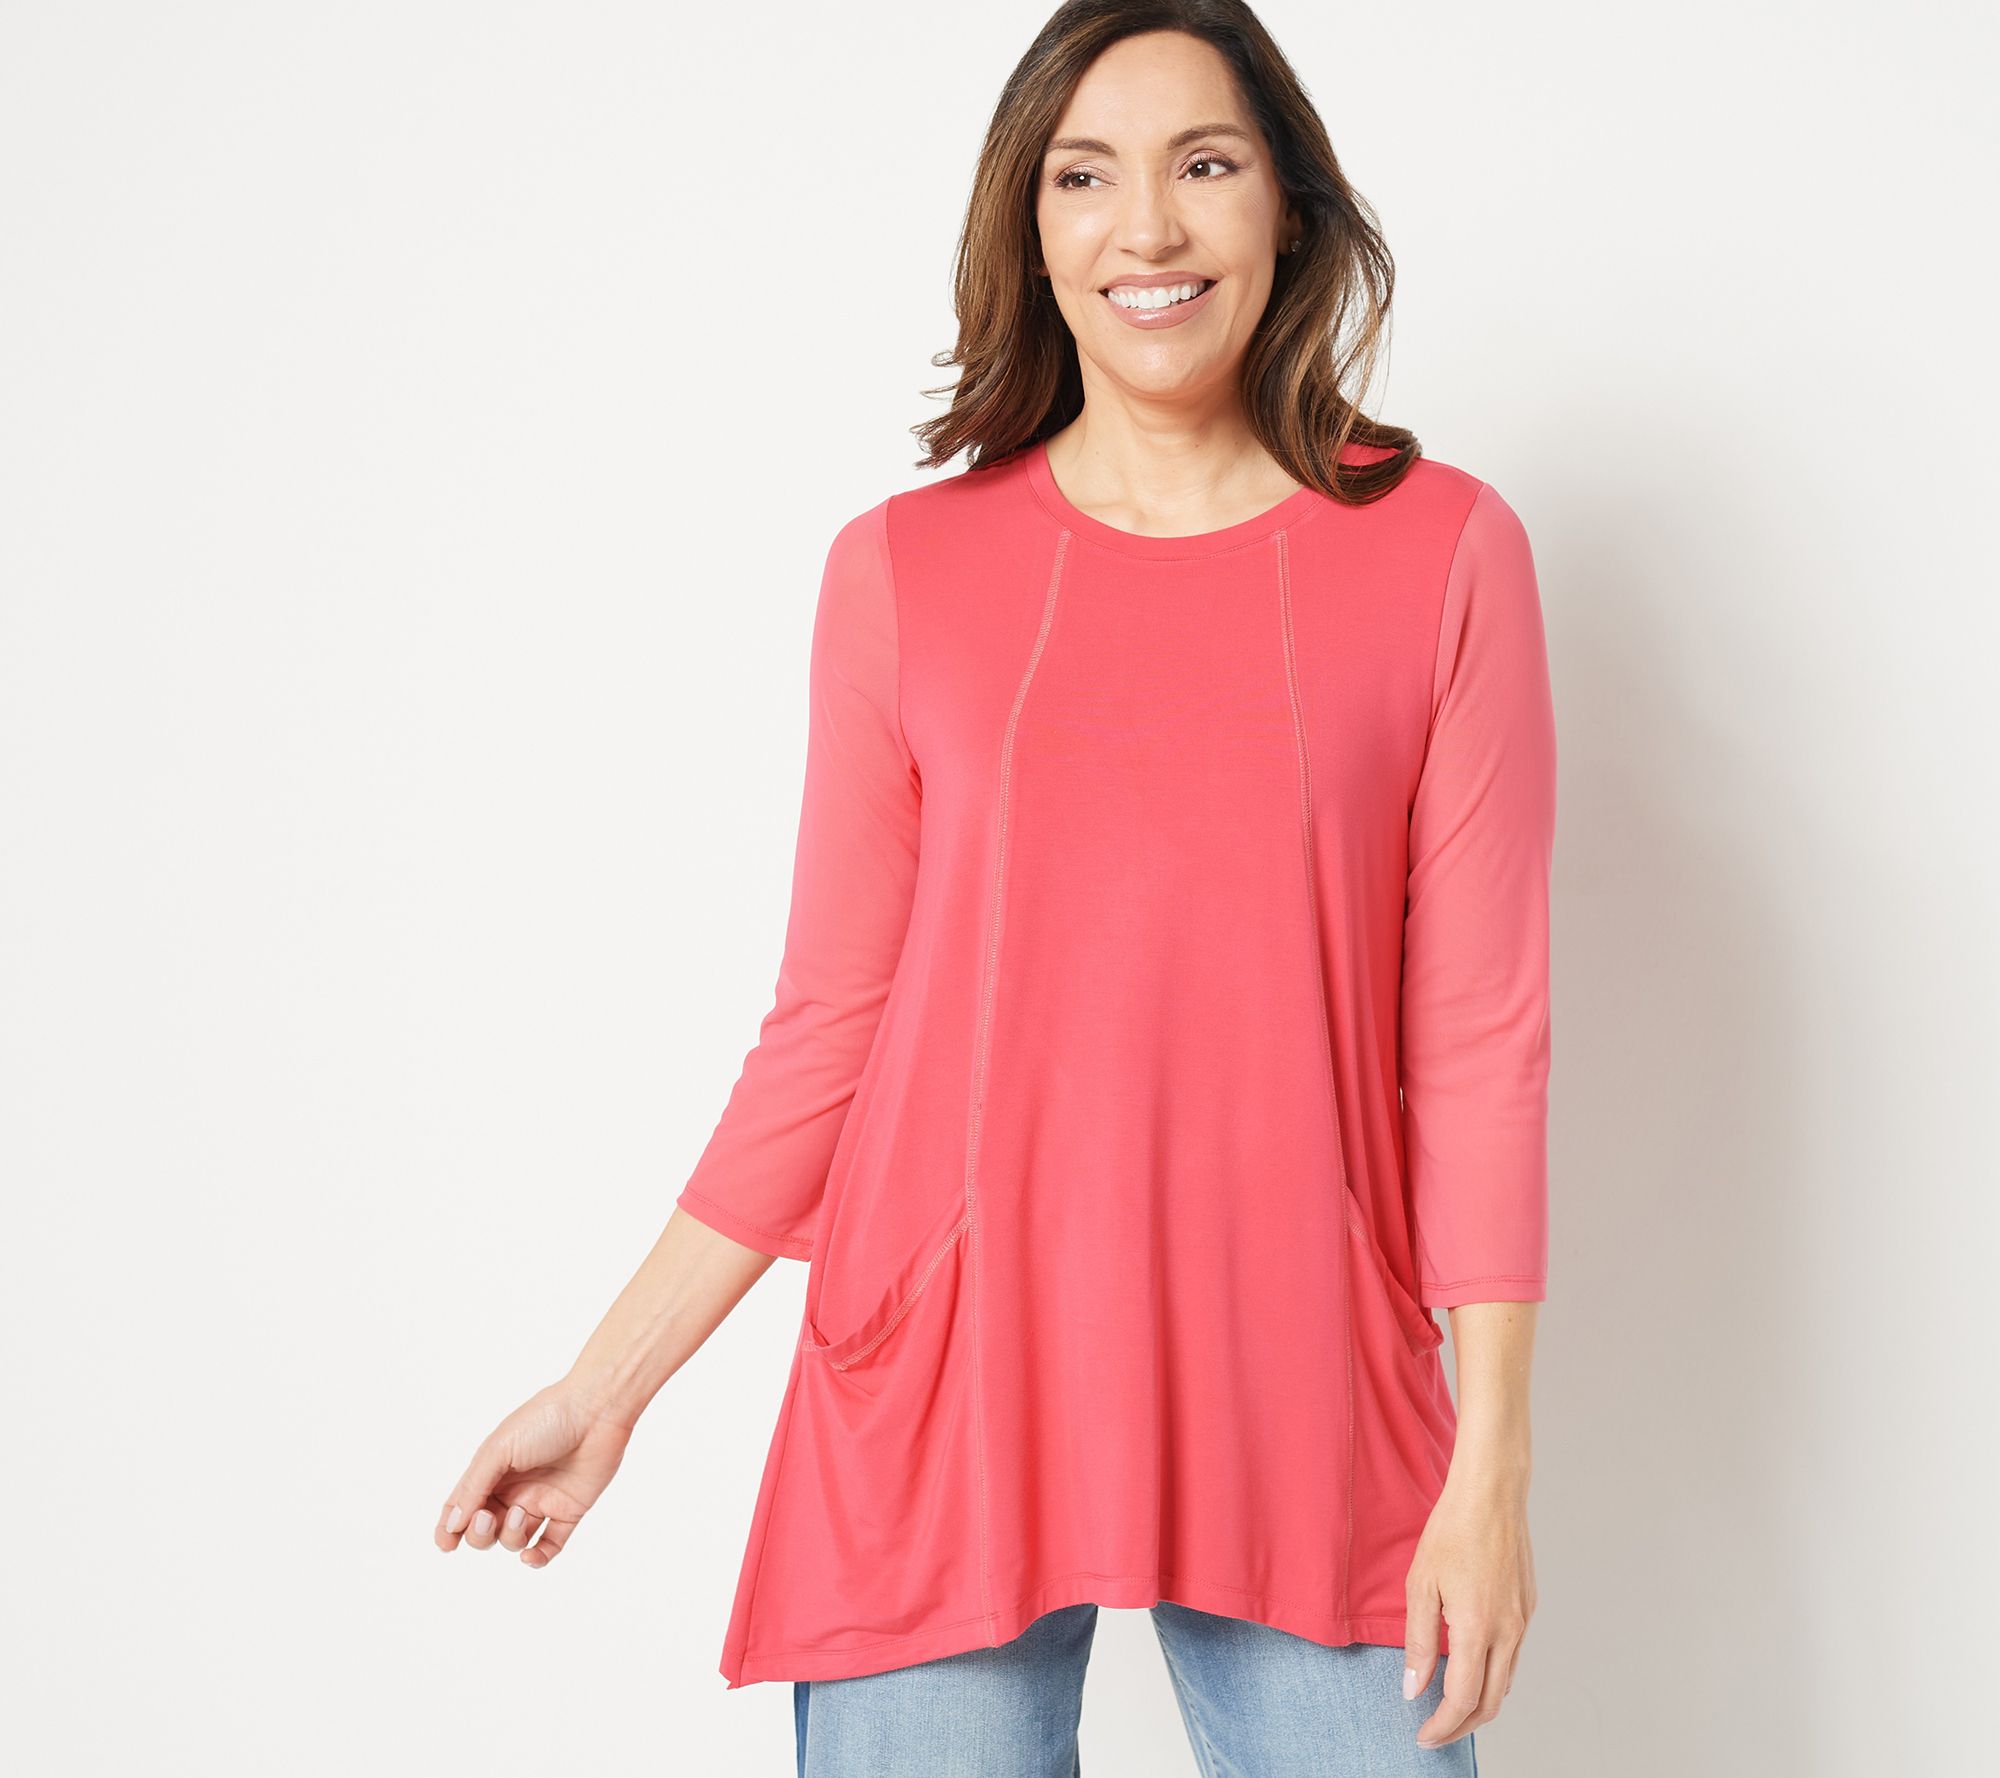 LOGO by Lori Goldstein Rayon 230 Top with Mesh Sleeves - QVC.com